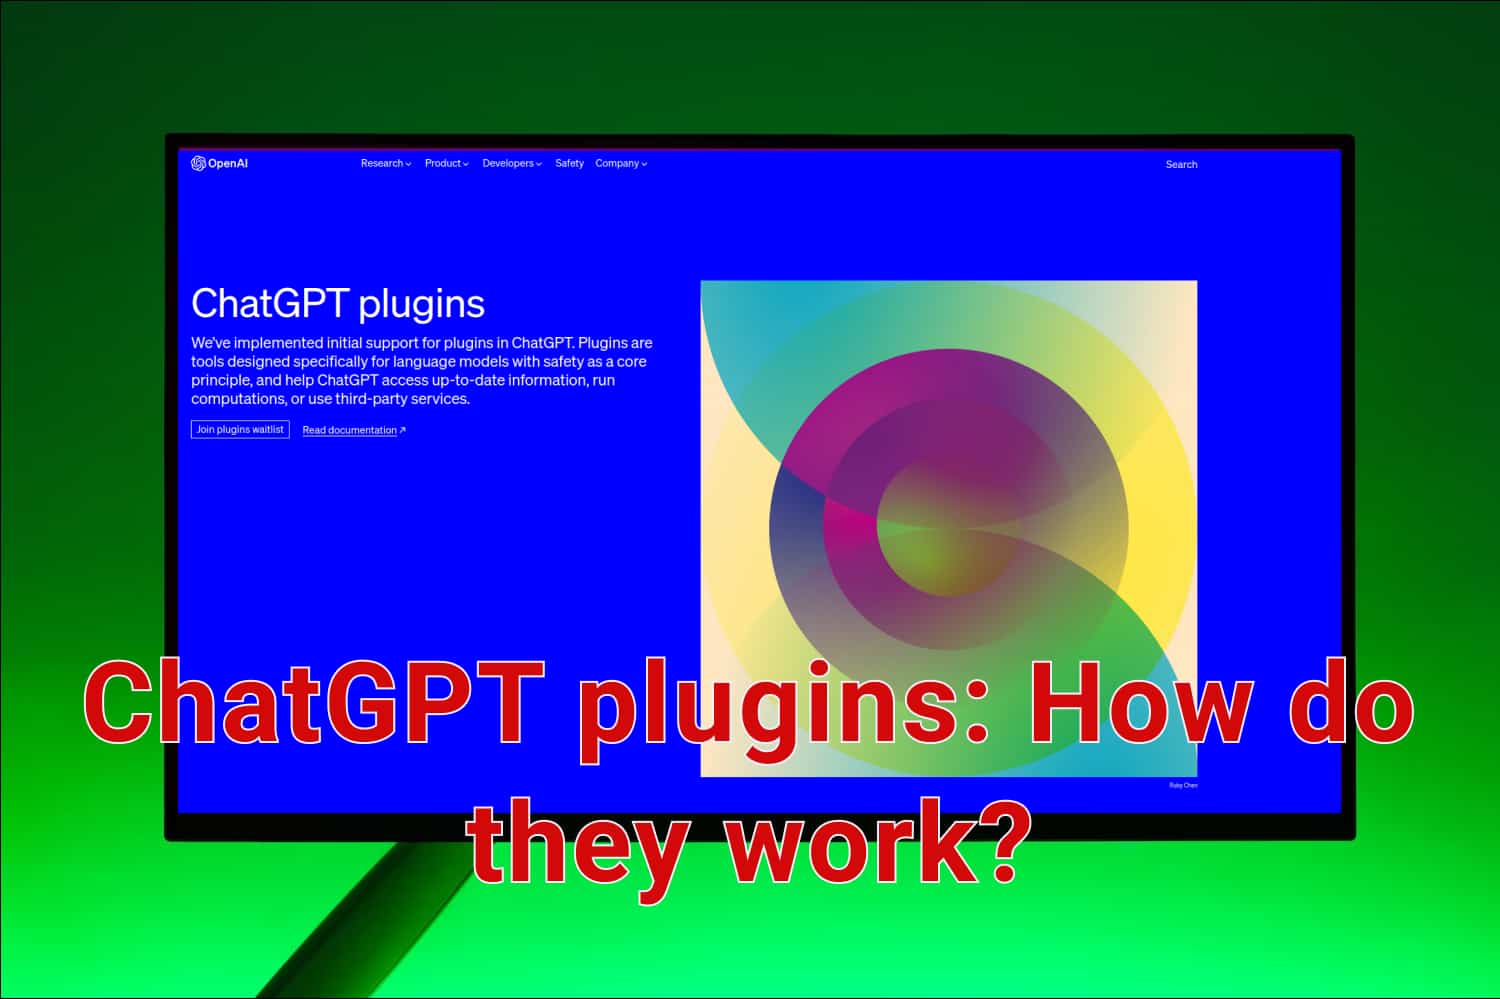 How do ChatGPT plugins work?